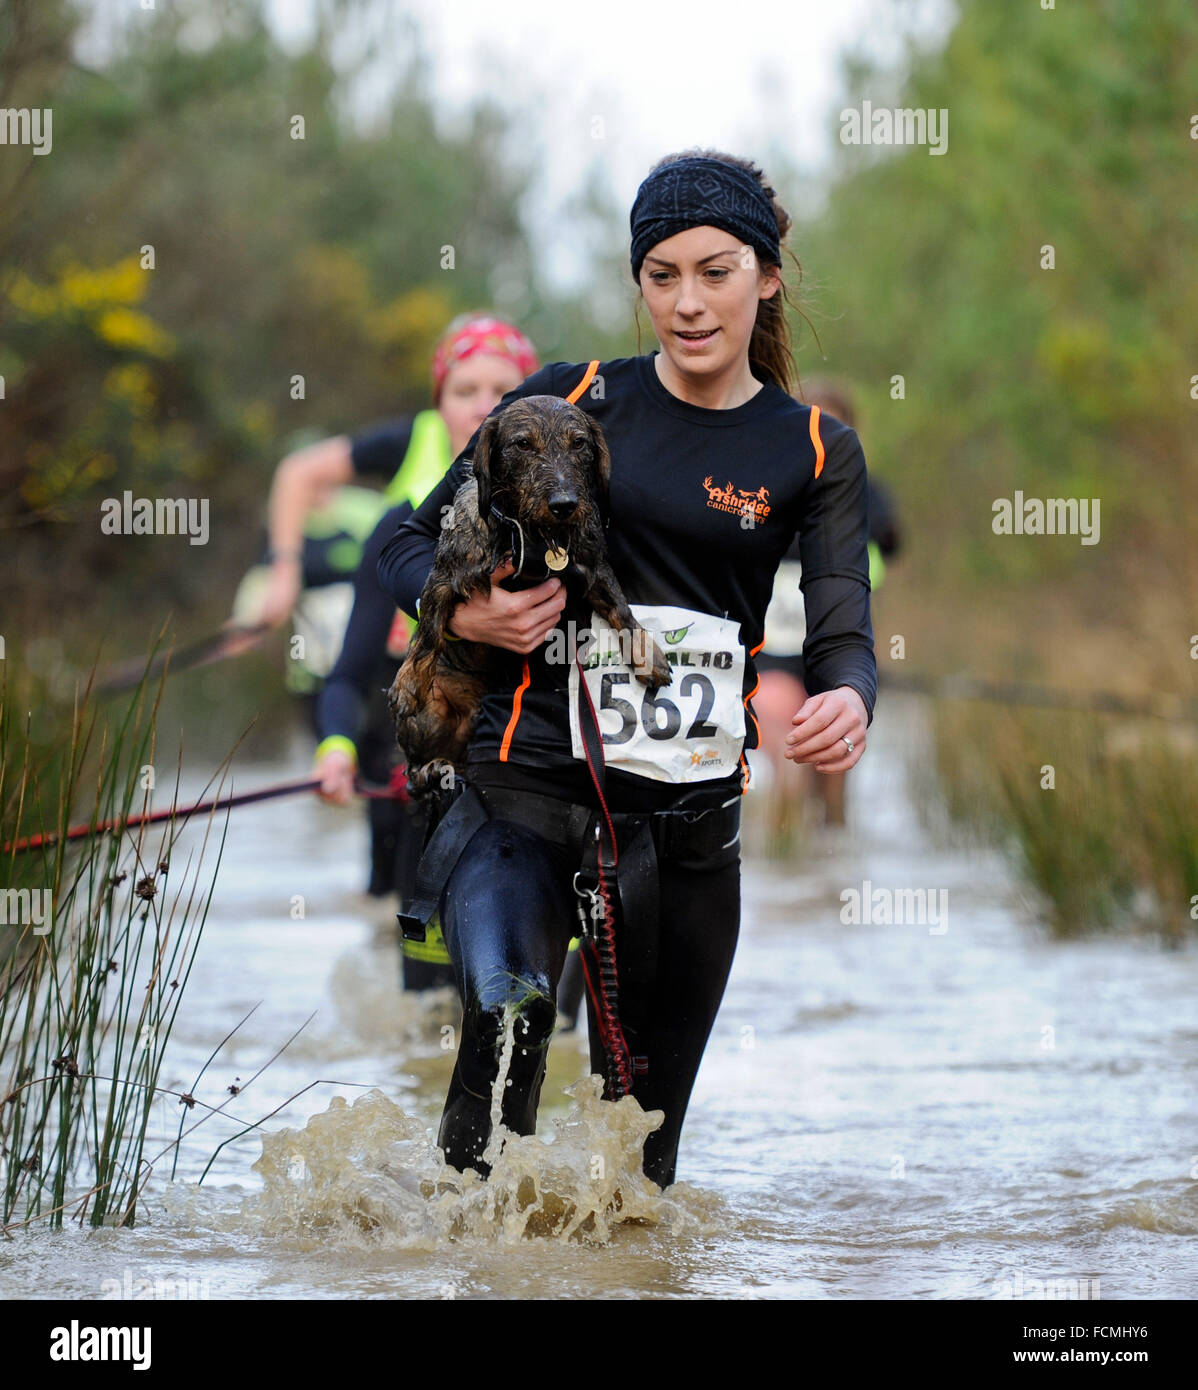 Aldershot, Hants, UK. 23rd January, 2016. Bronwyn Hal with her dog Sawyer  struggle through the flooded streams of the Brutal women only  10km canicross race at Long valley Aldershot Hampshire having to break the ice as the make there way around the course .  The recent weather made the Brutal 10km off road course live up to its name as the puddles and streams where up to waste height in many places with early runners having to break the ice as they entered the water. Credit:  PBWPIX/Alamy Live News Stock Photo